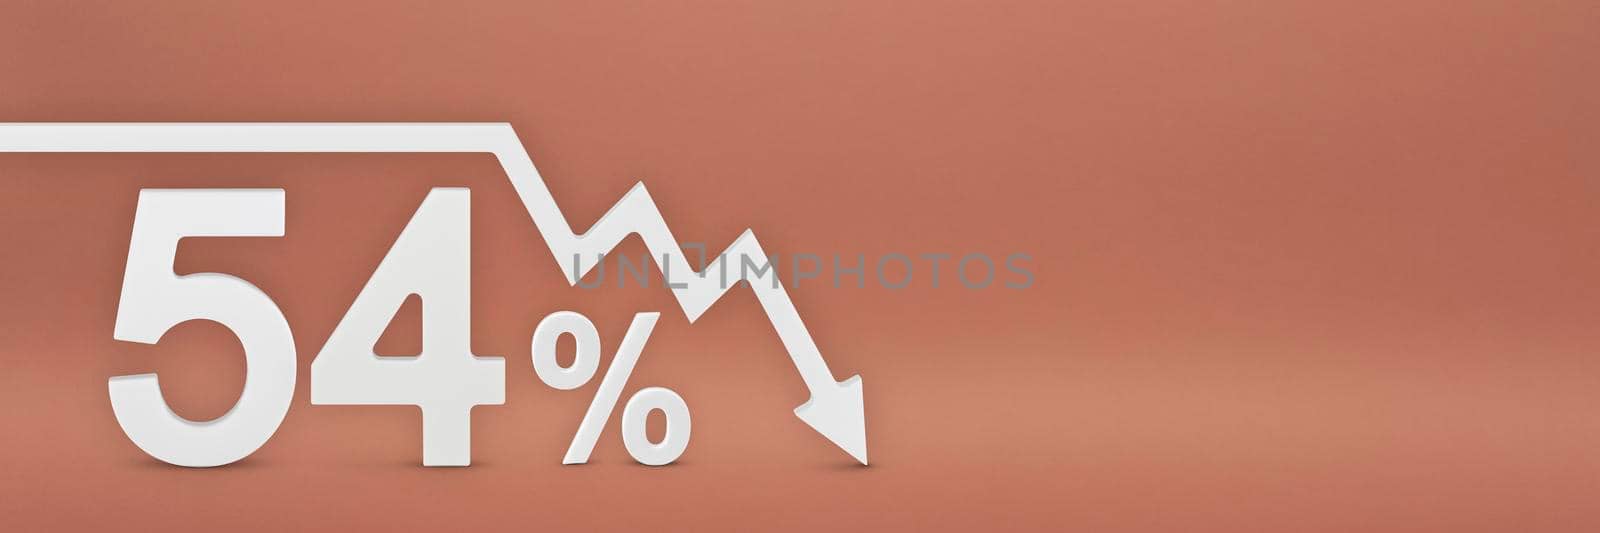 fifty-four percent, the arrow on the graph is pointing down. Stock market crash, bear market, inflation.Economic collapse, collapse of stocks.3d banner,54 percent discount sign on a red background